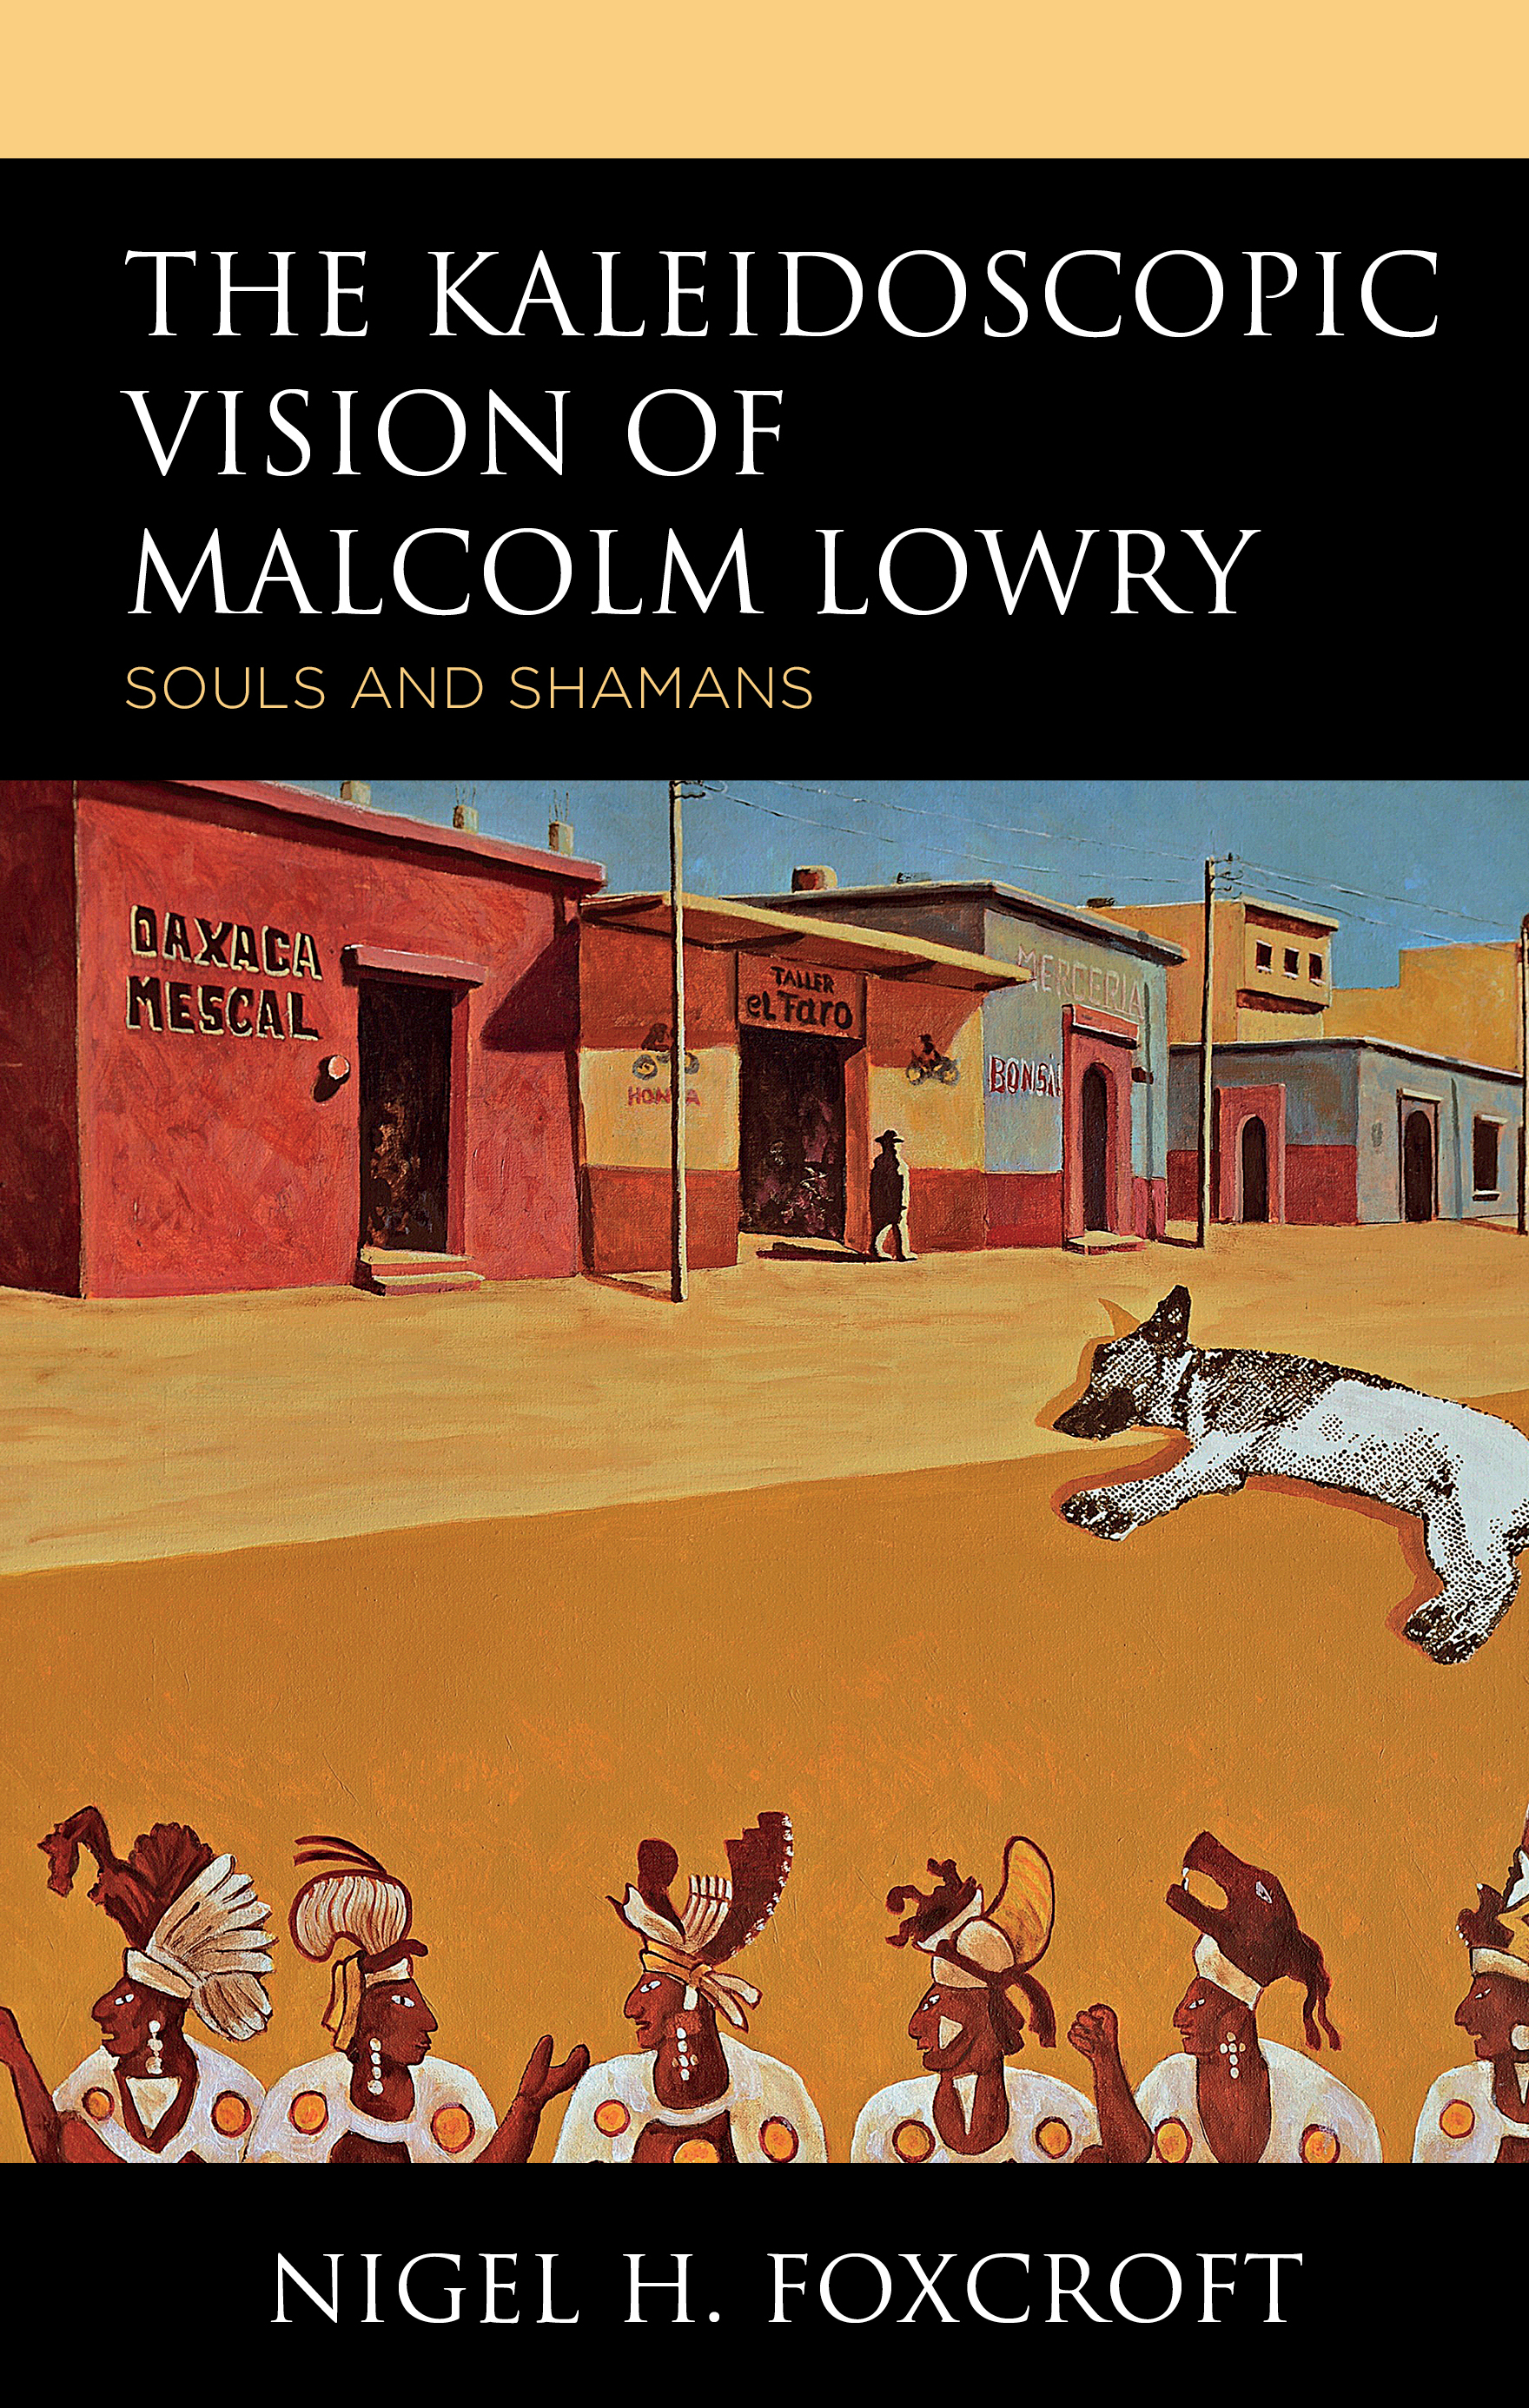 The Kaleidoscopic Vision of Malcolm Lowry: Souls and Shamans